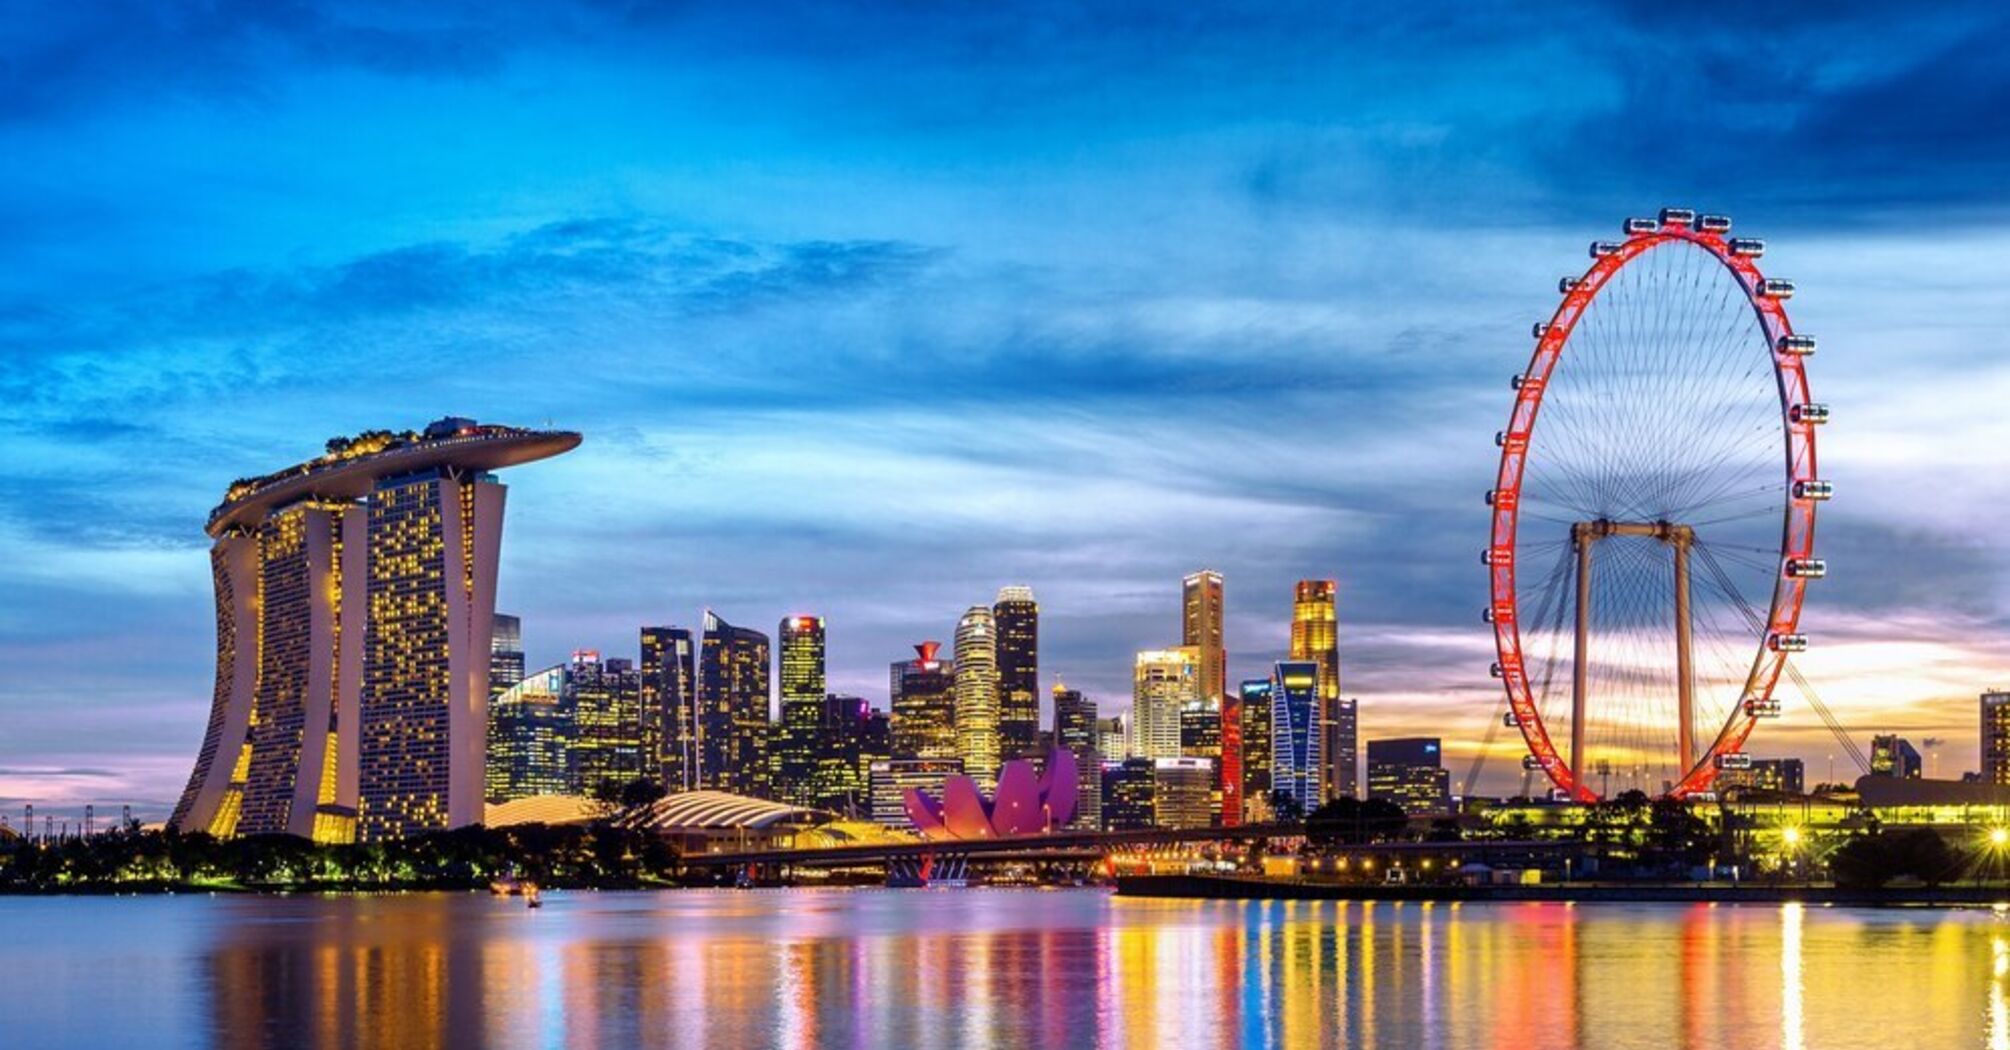 13.6 million visitors and $24.5-26.0 billion in revenue: tourism in Singapore was actively developing in 2023